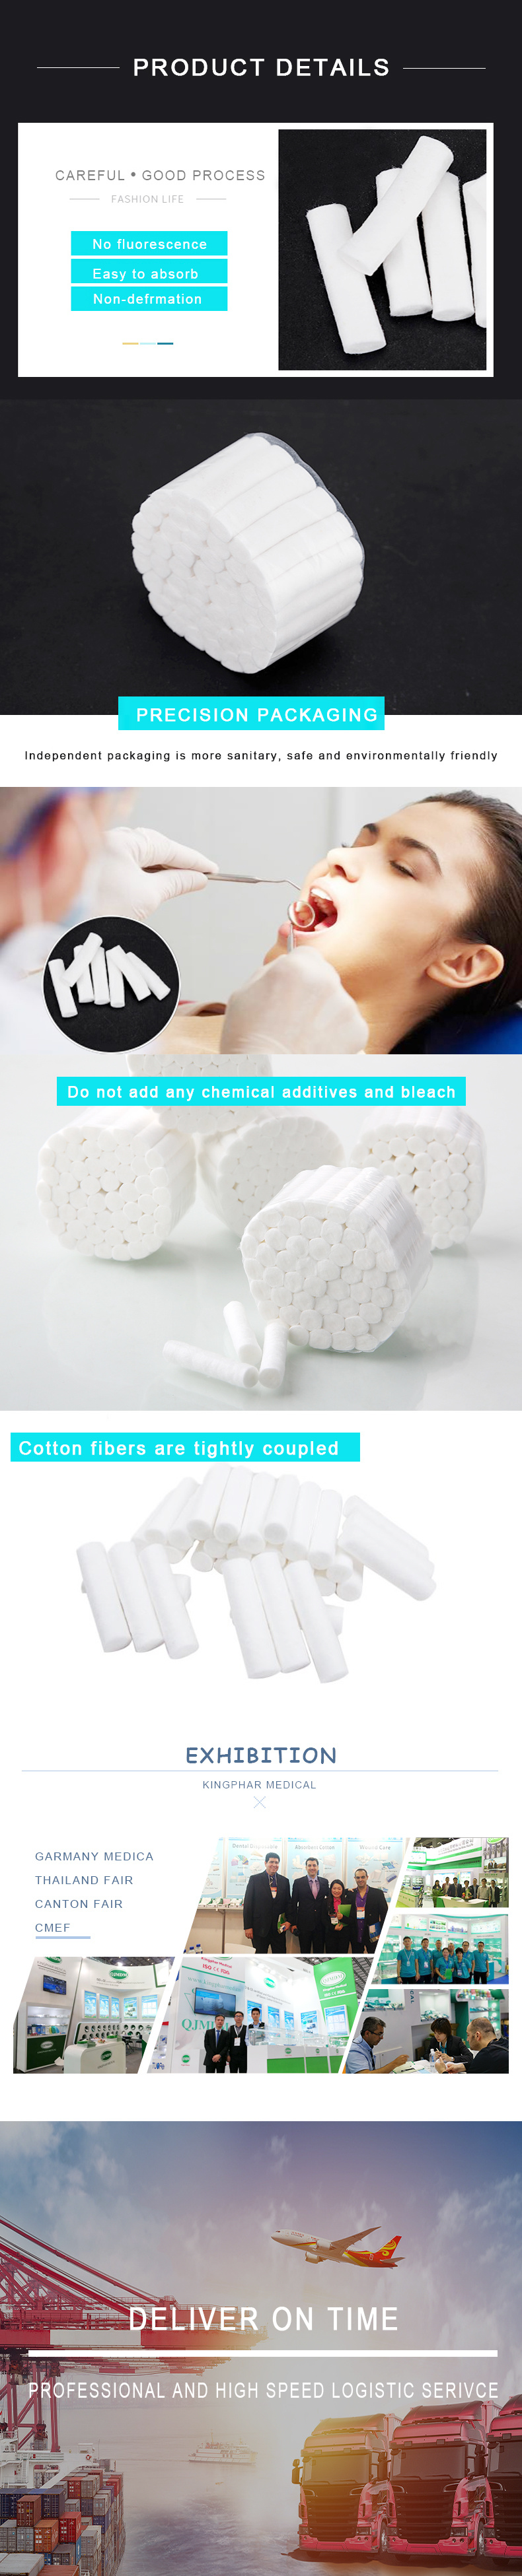 100% Pure Cotton Dental Cotton Roll for Medical Use